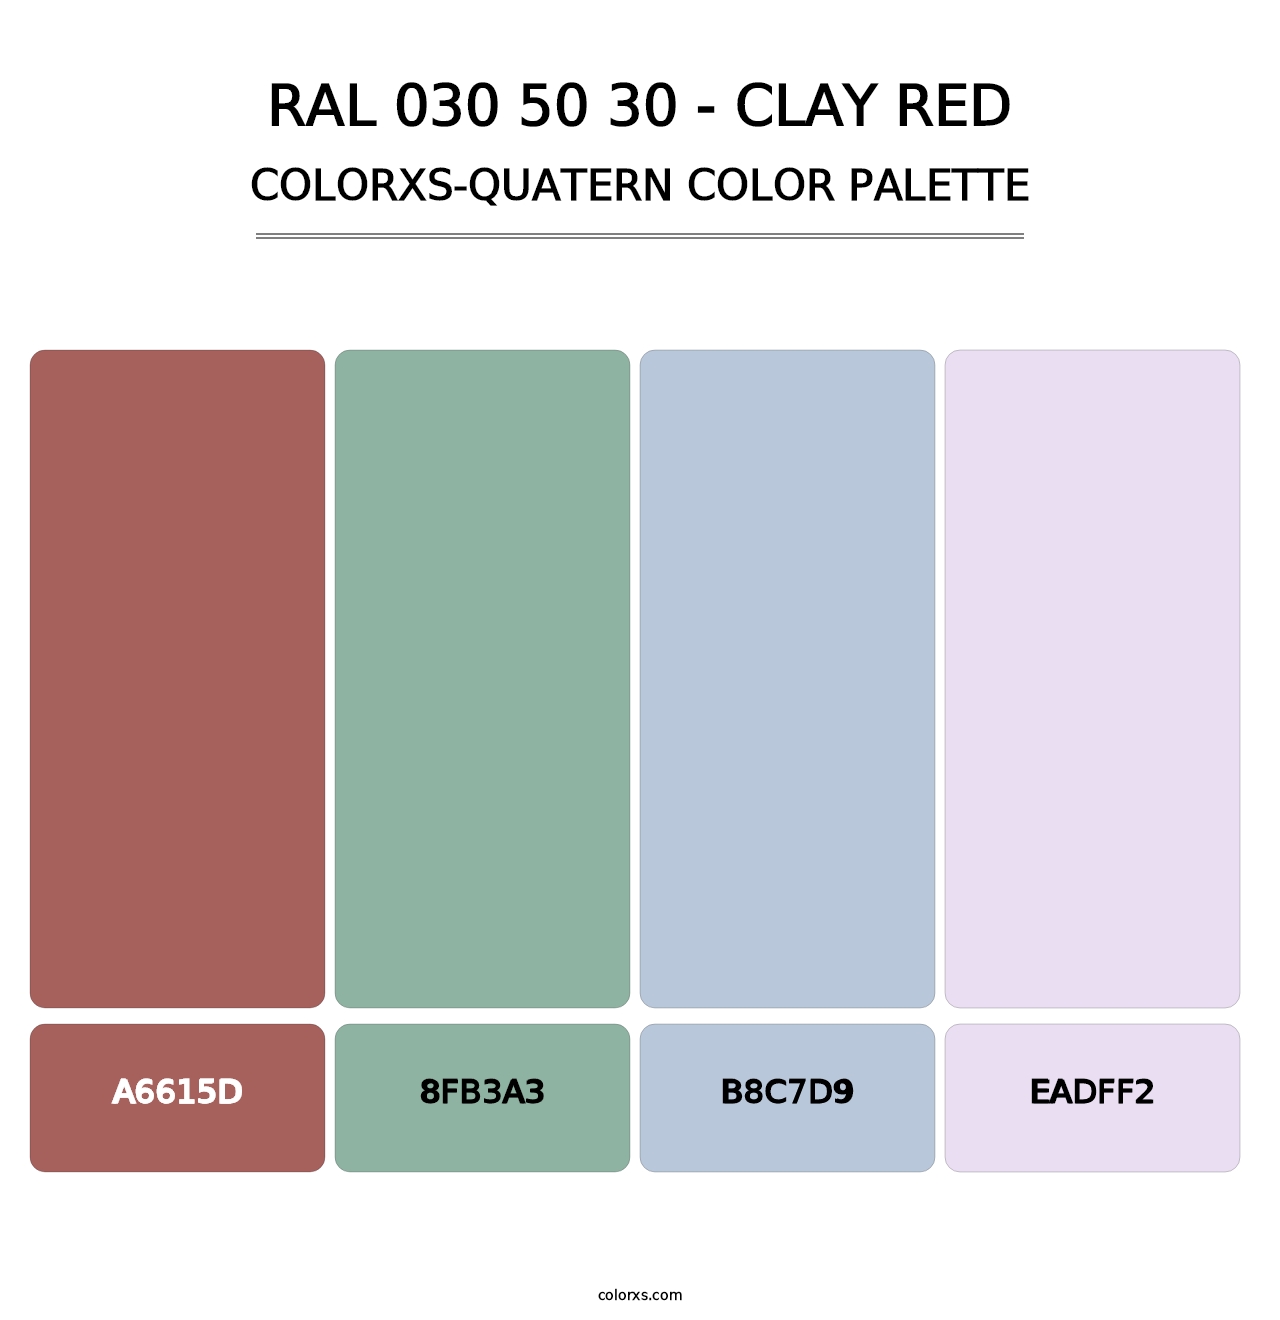 RAL 030 50 30 - Clay Red - Colorxs Quatern Palette